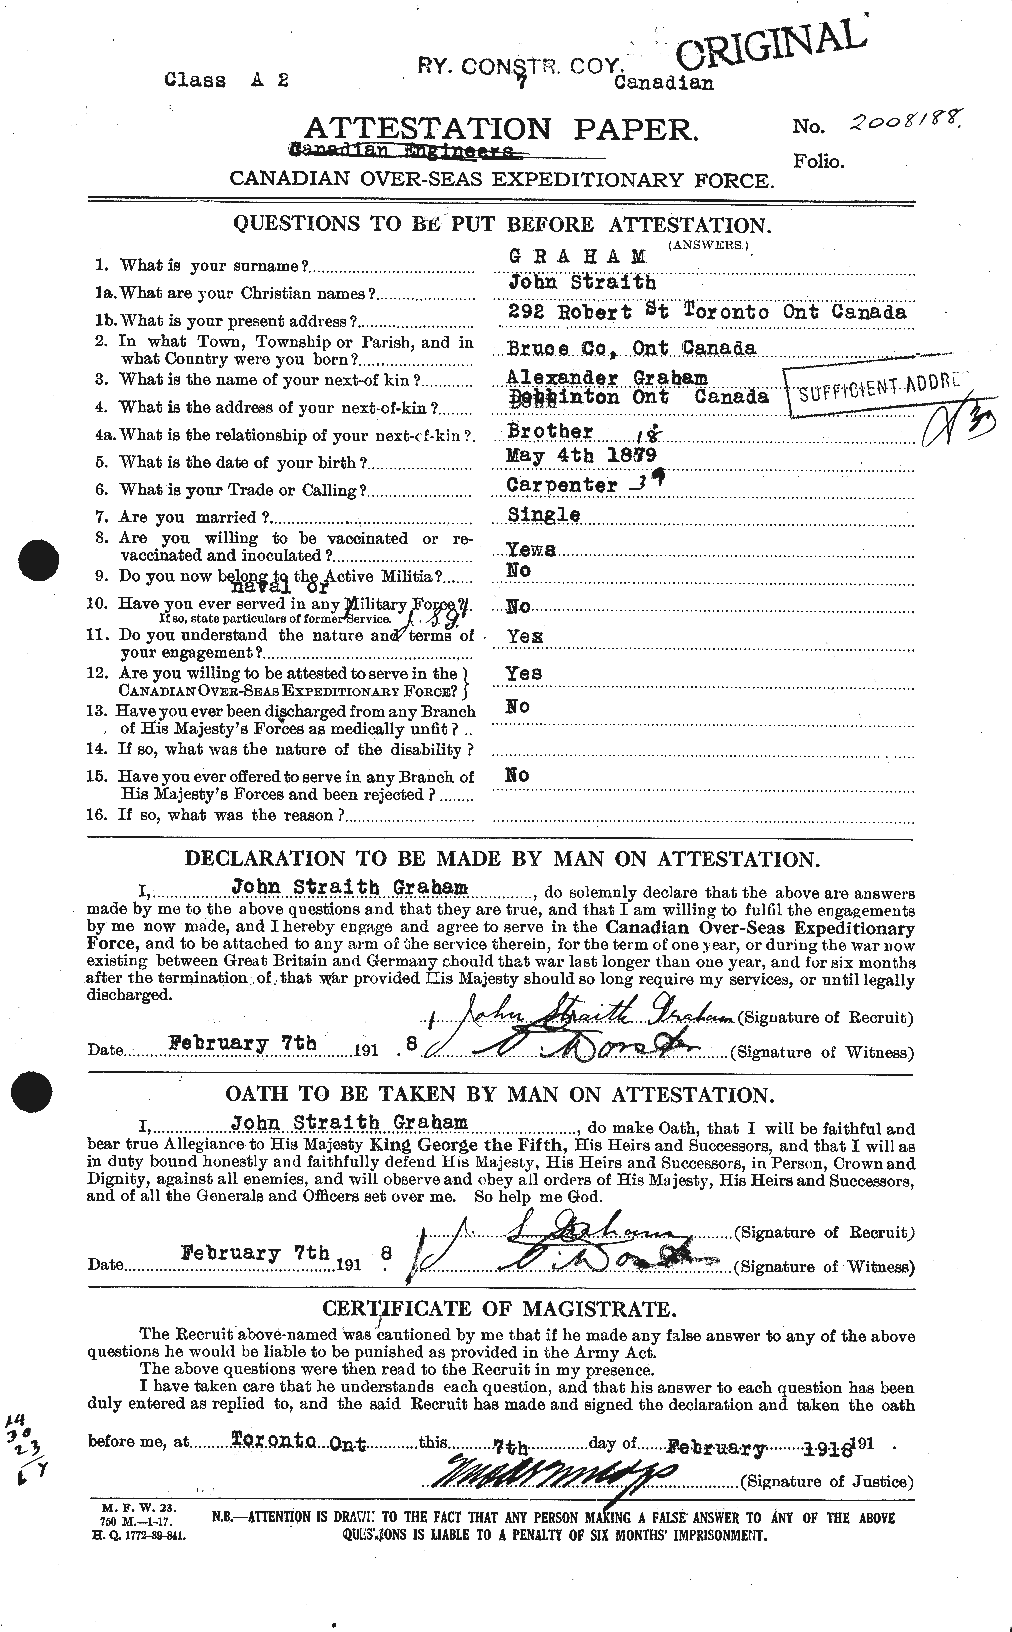 Personnel Records of the First World War - CEF 359211a